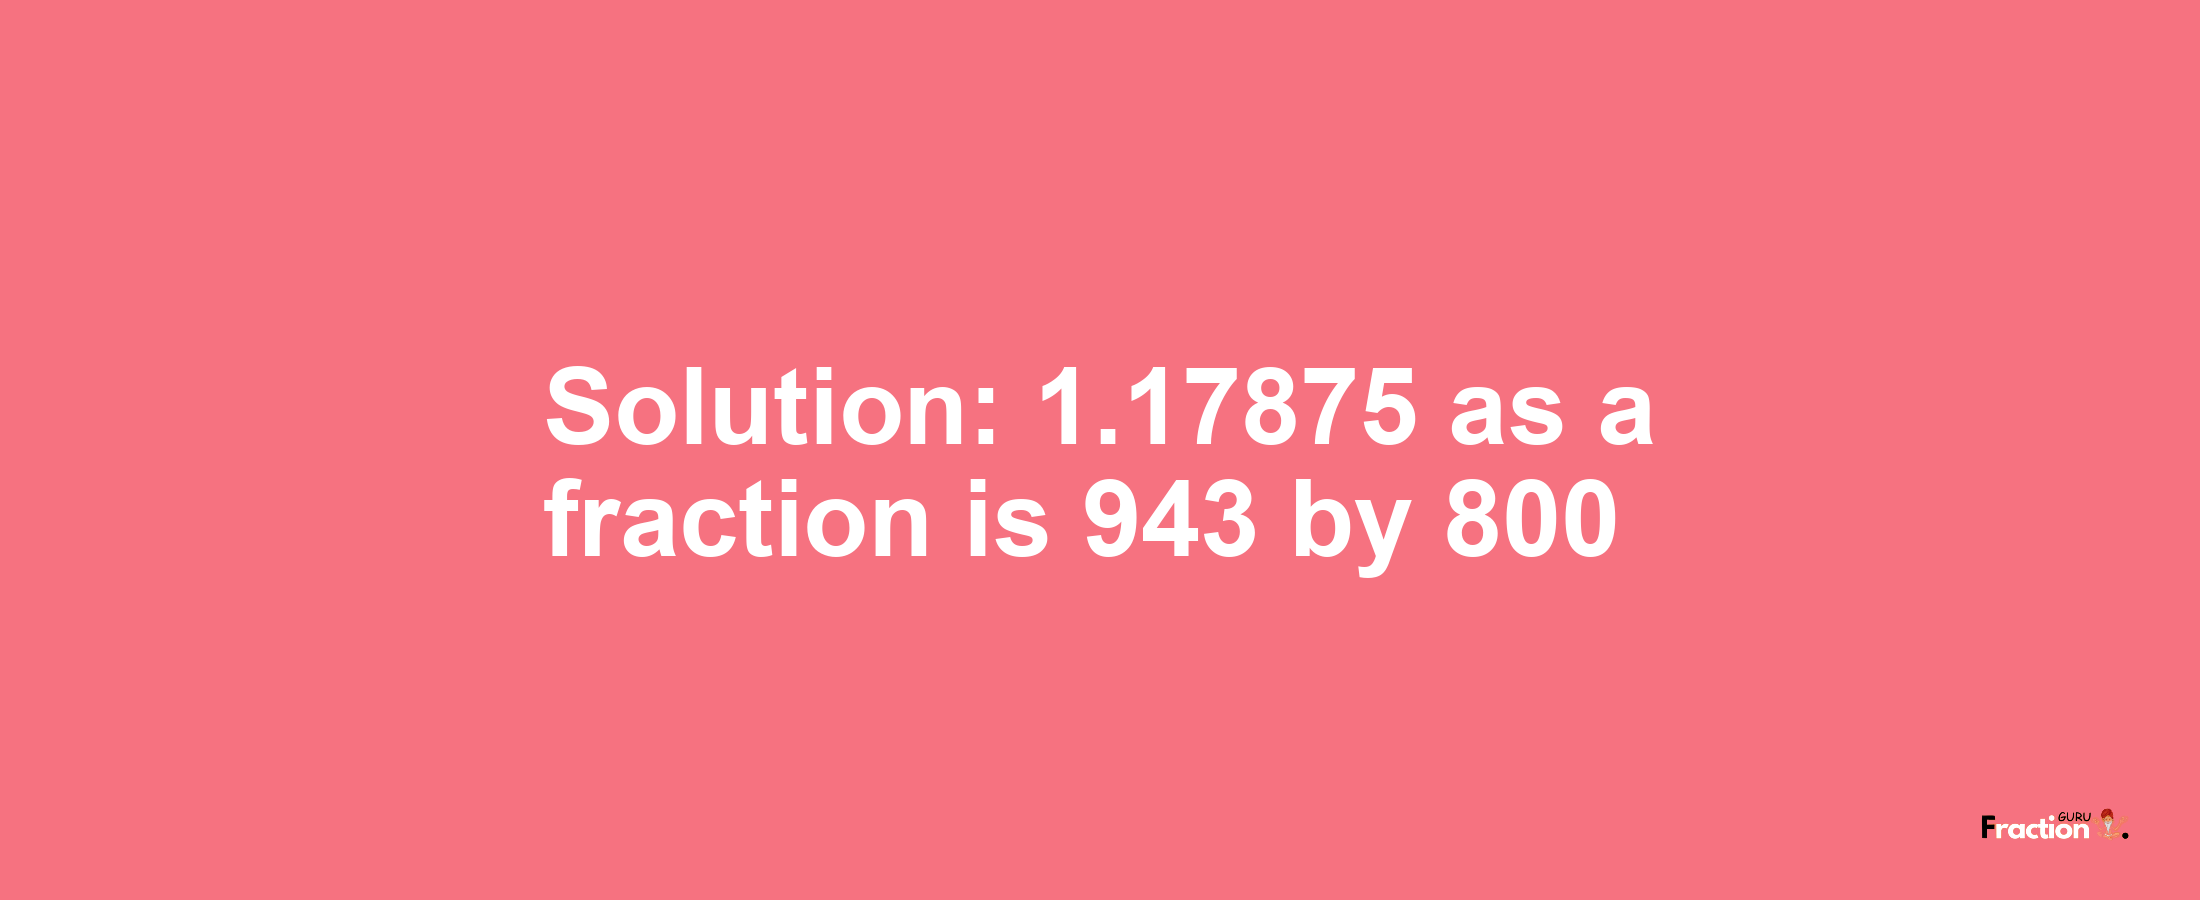 Solution:1.17875 as a fraction is 943/800